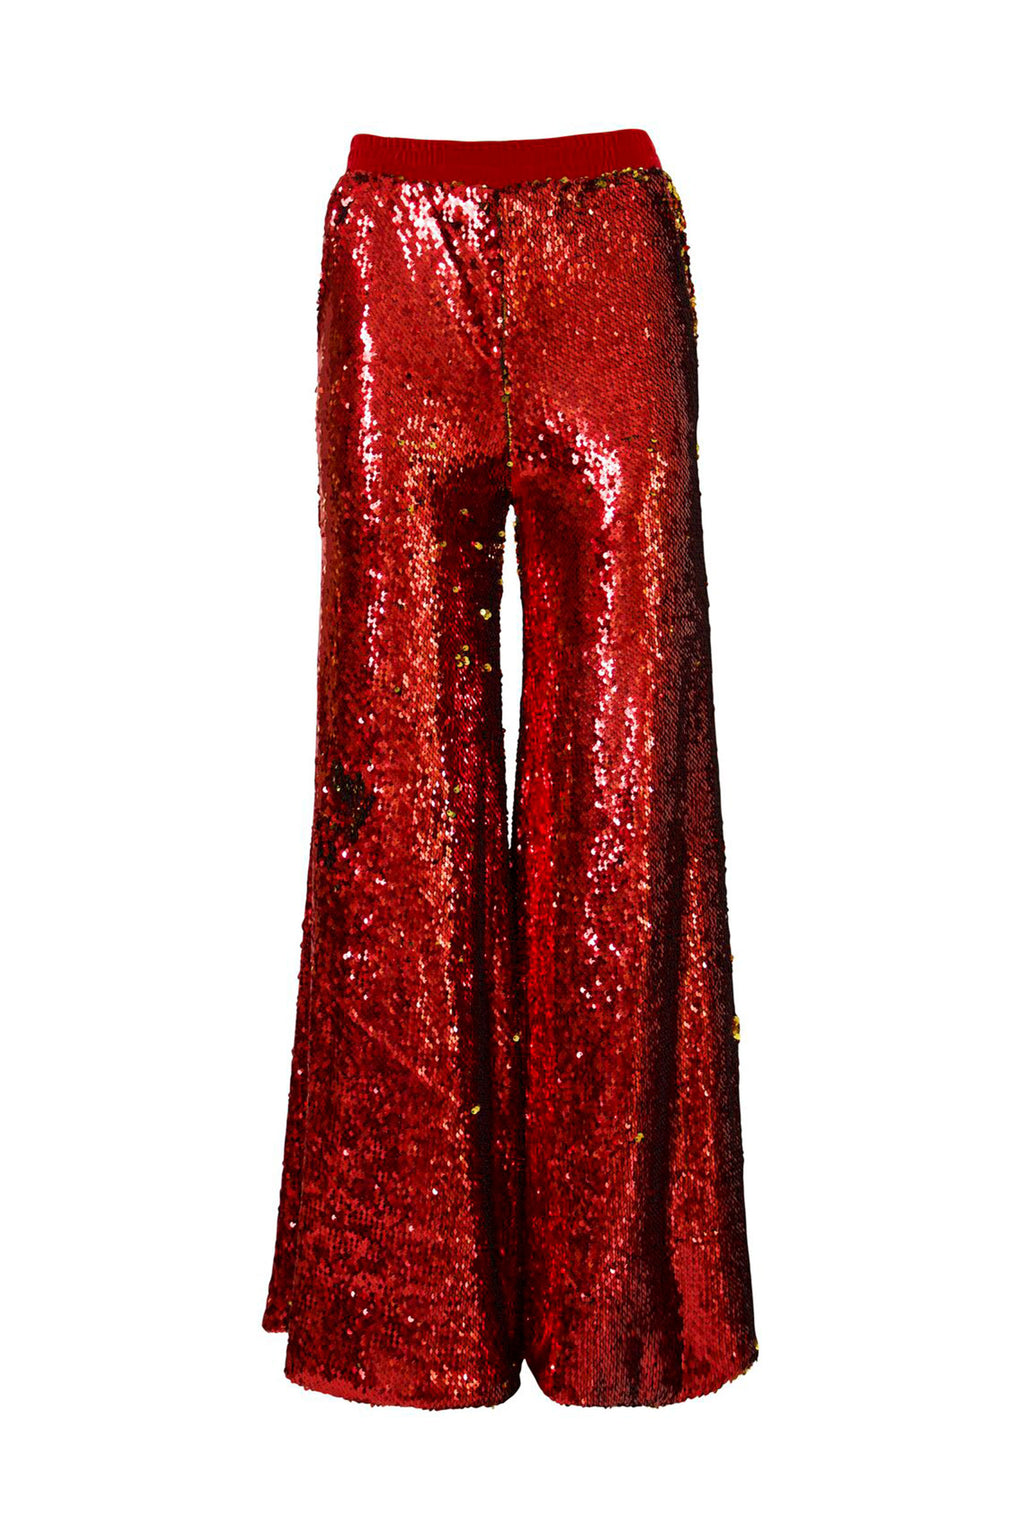 River Island Sequin Wide Leg Trouser  Red  verycouk